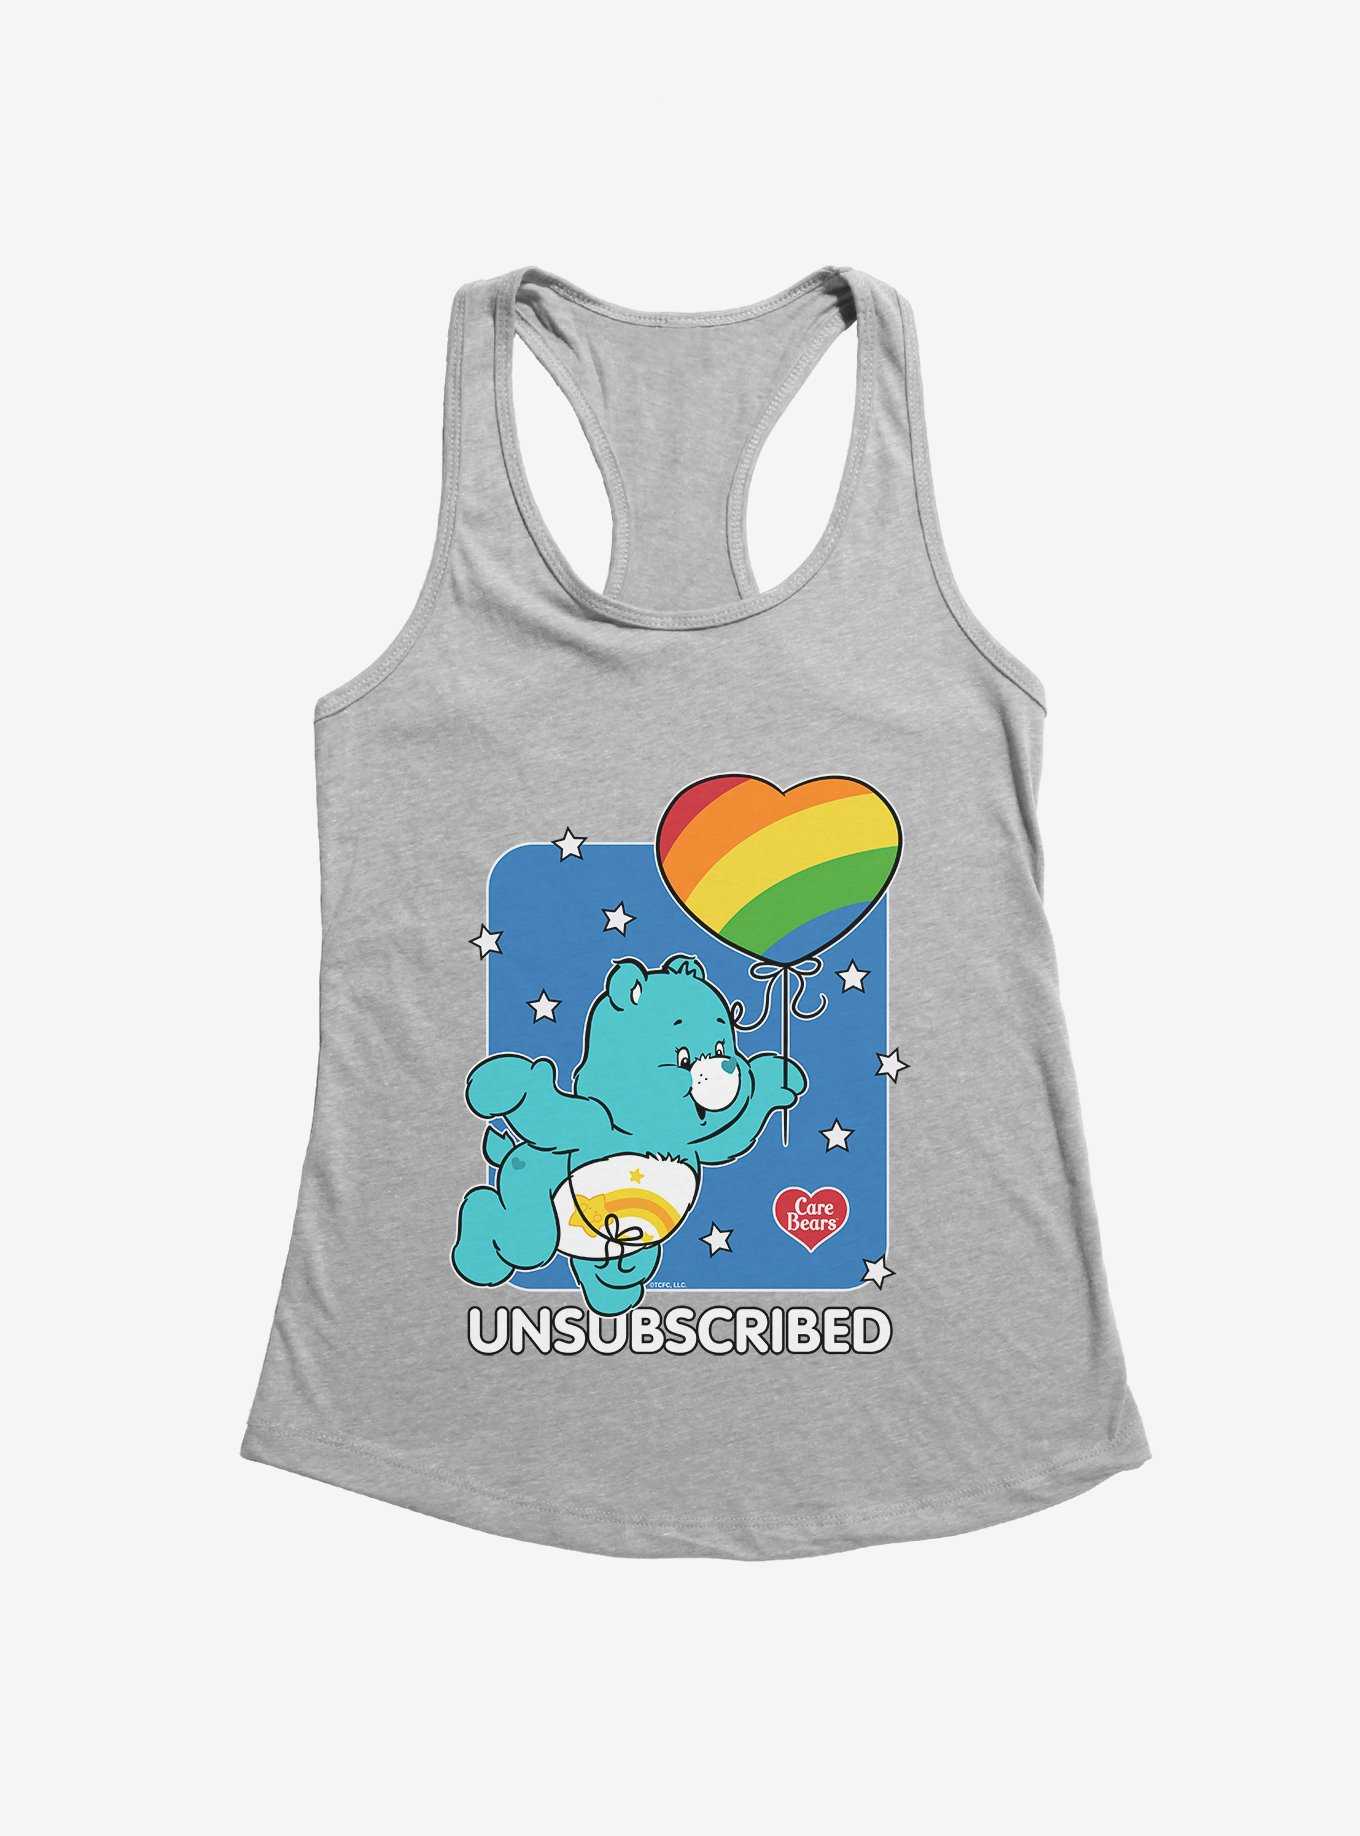 Care Bears Unsubscribed Girls Tank, HEATHER, hi-res